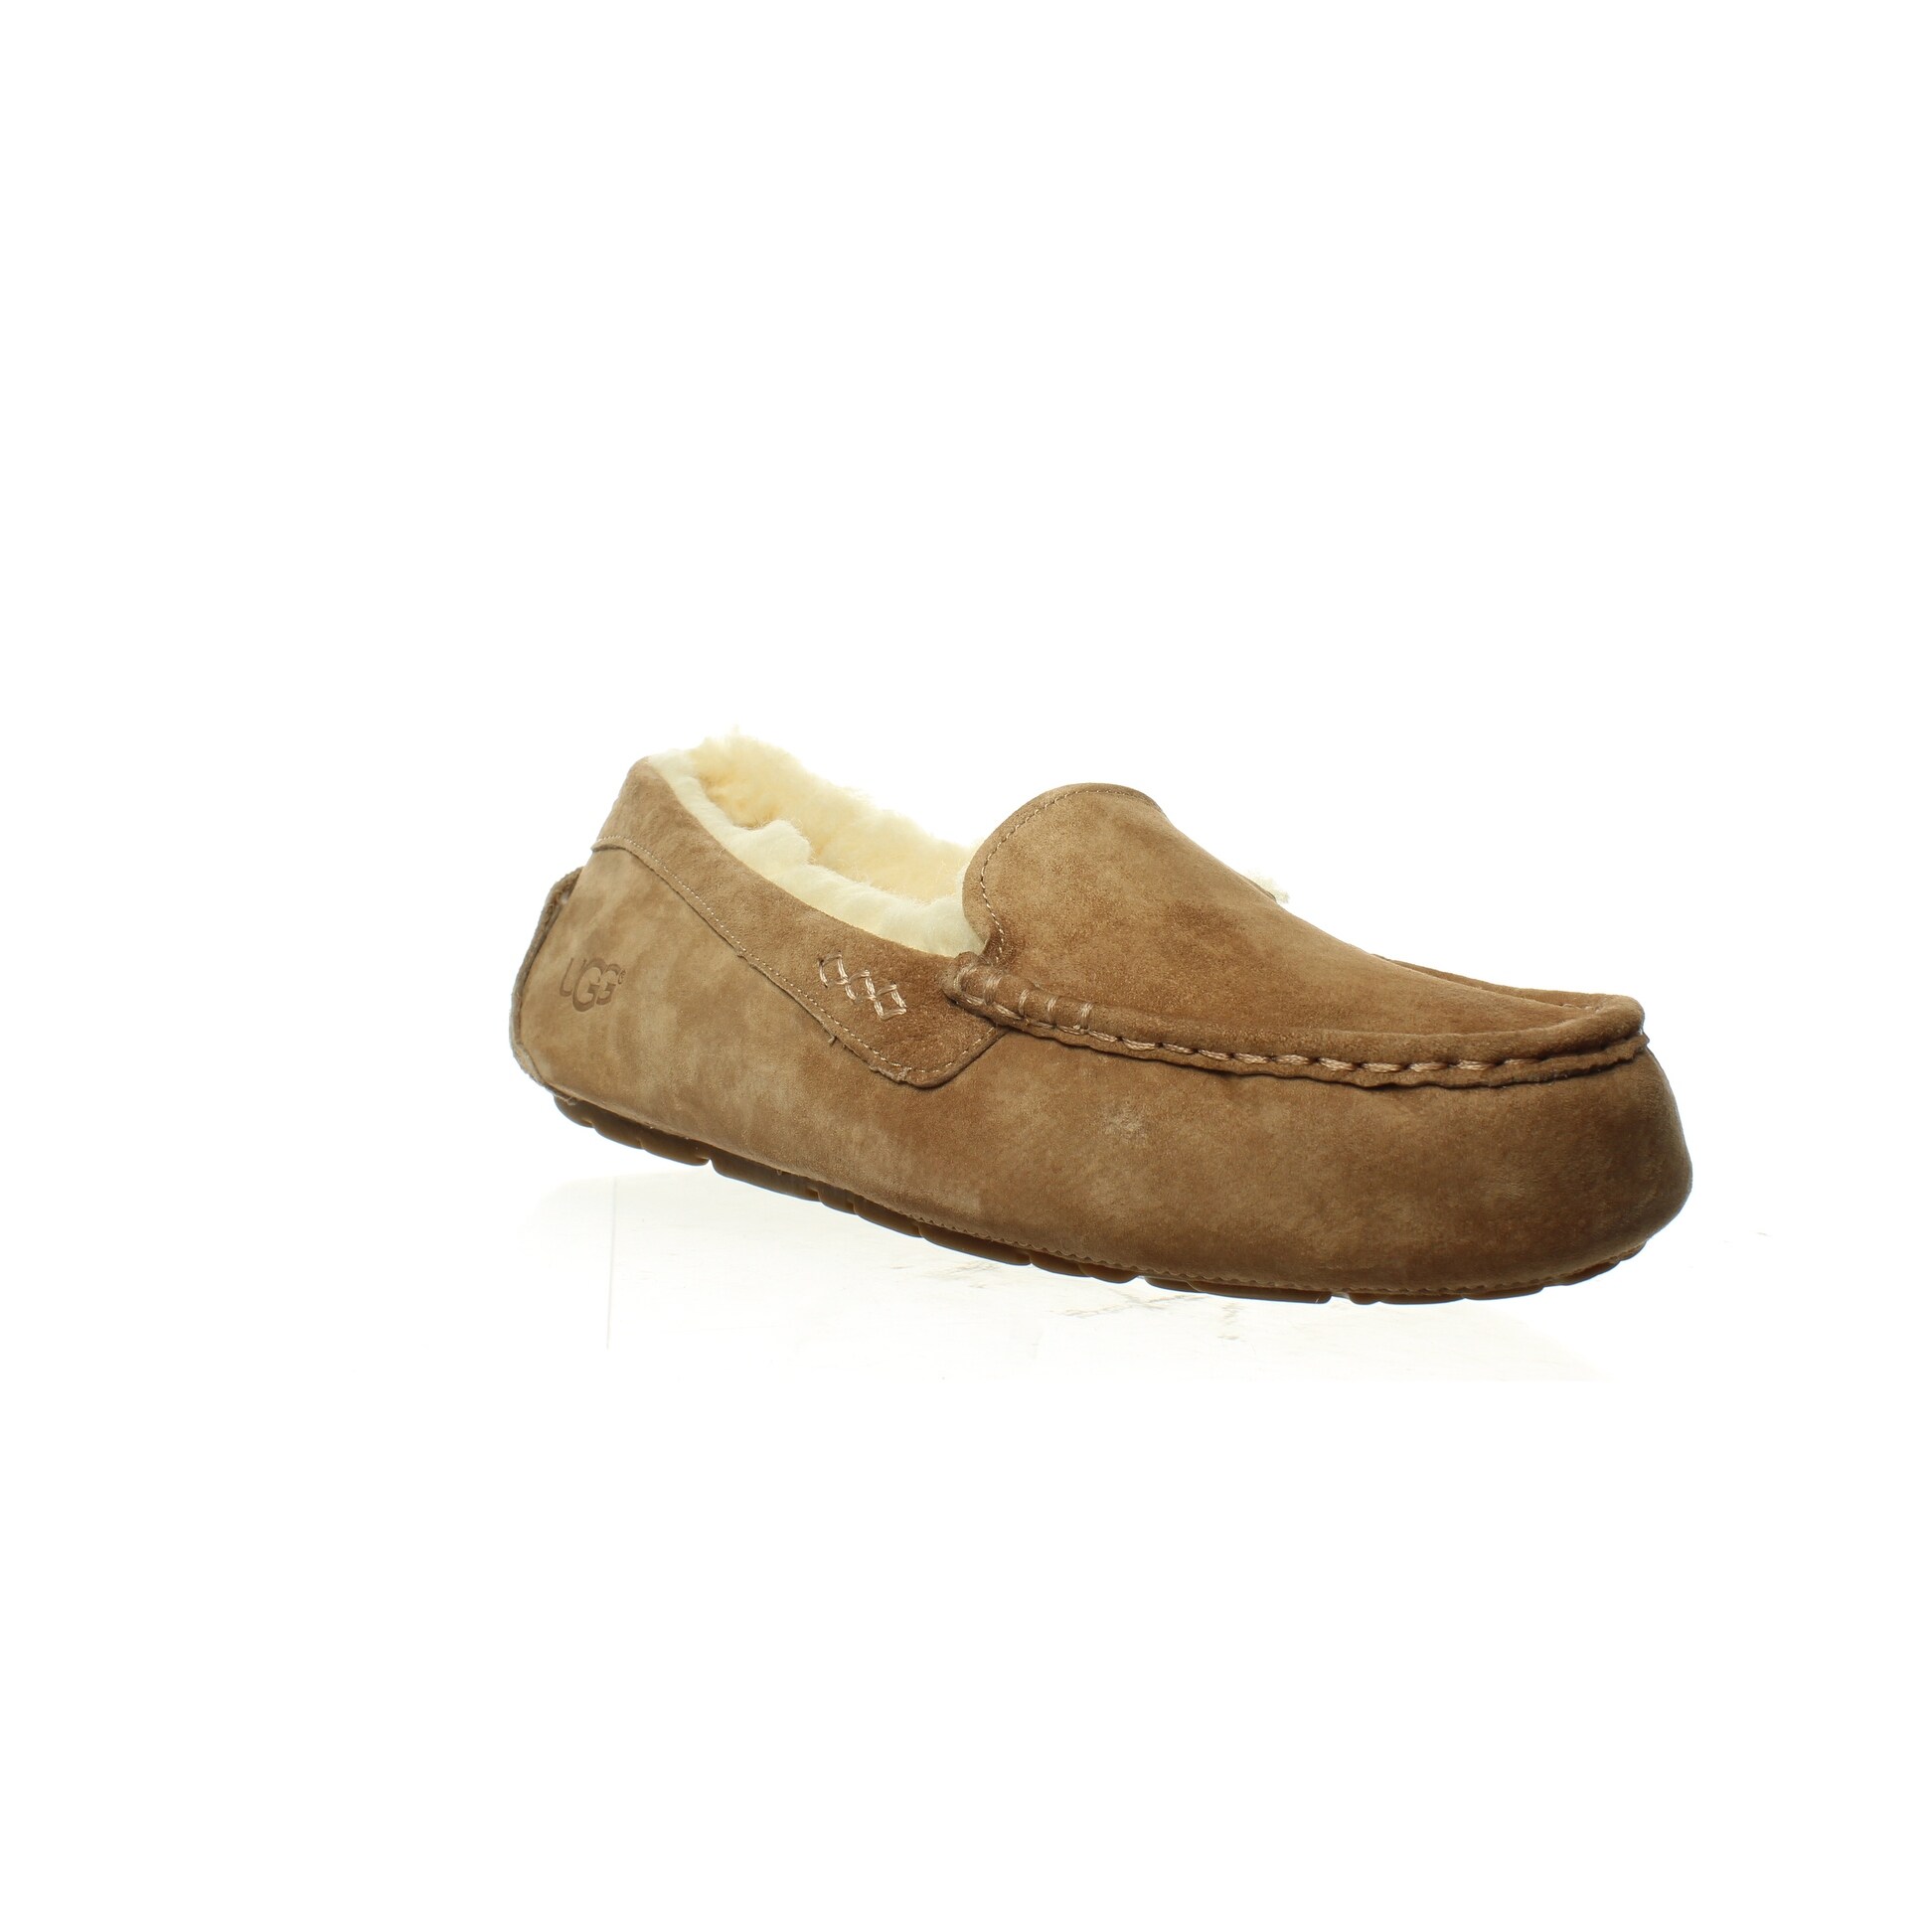 size 12 ugg slippers